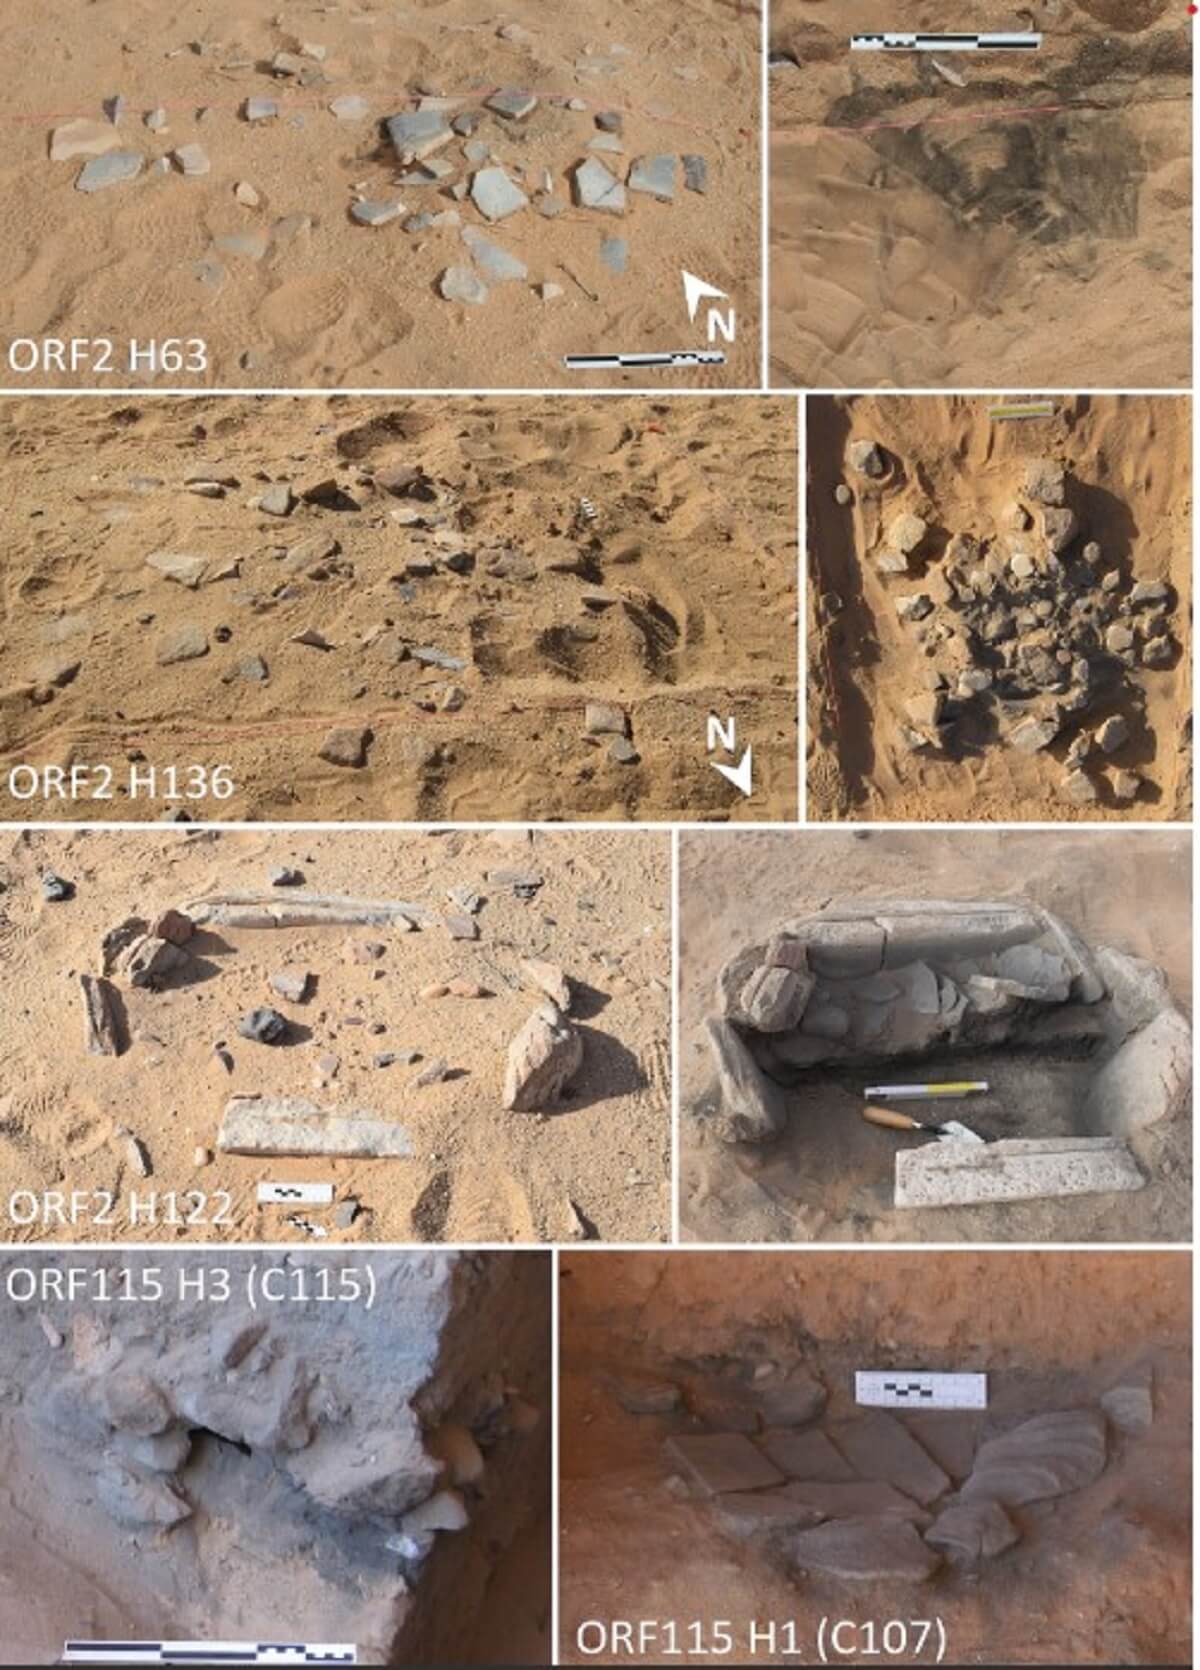 Plant, pigment, and bone processing in the Neolithic of northern Arabia–New evidence from Use-wear analysis of grinding tools at Jebel Oraf.